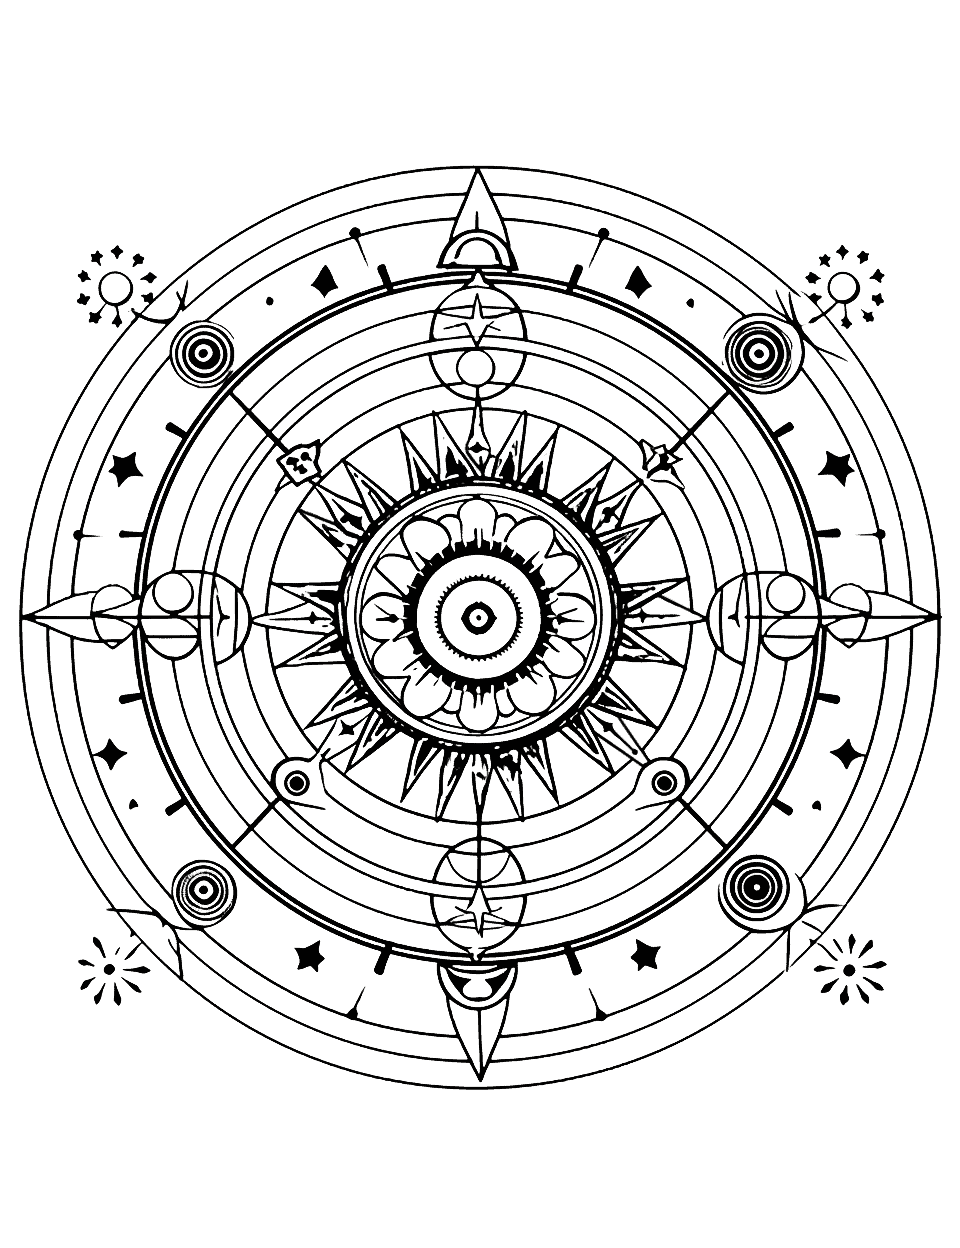 Complicated Cosmos Mandala Coloring Page - An intricate mandala design representing the cosmos, with celestial bodies and zodiac signs.